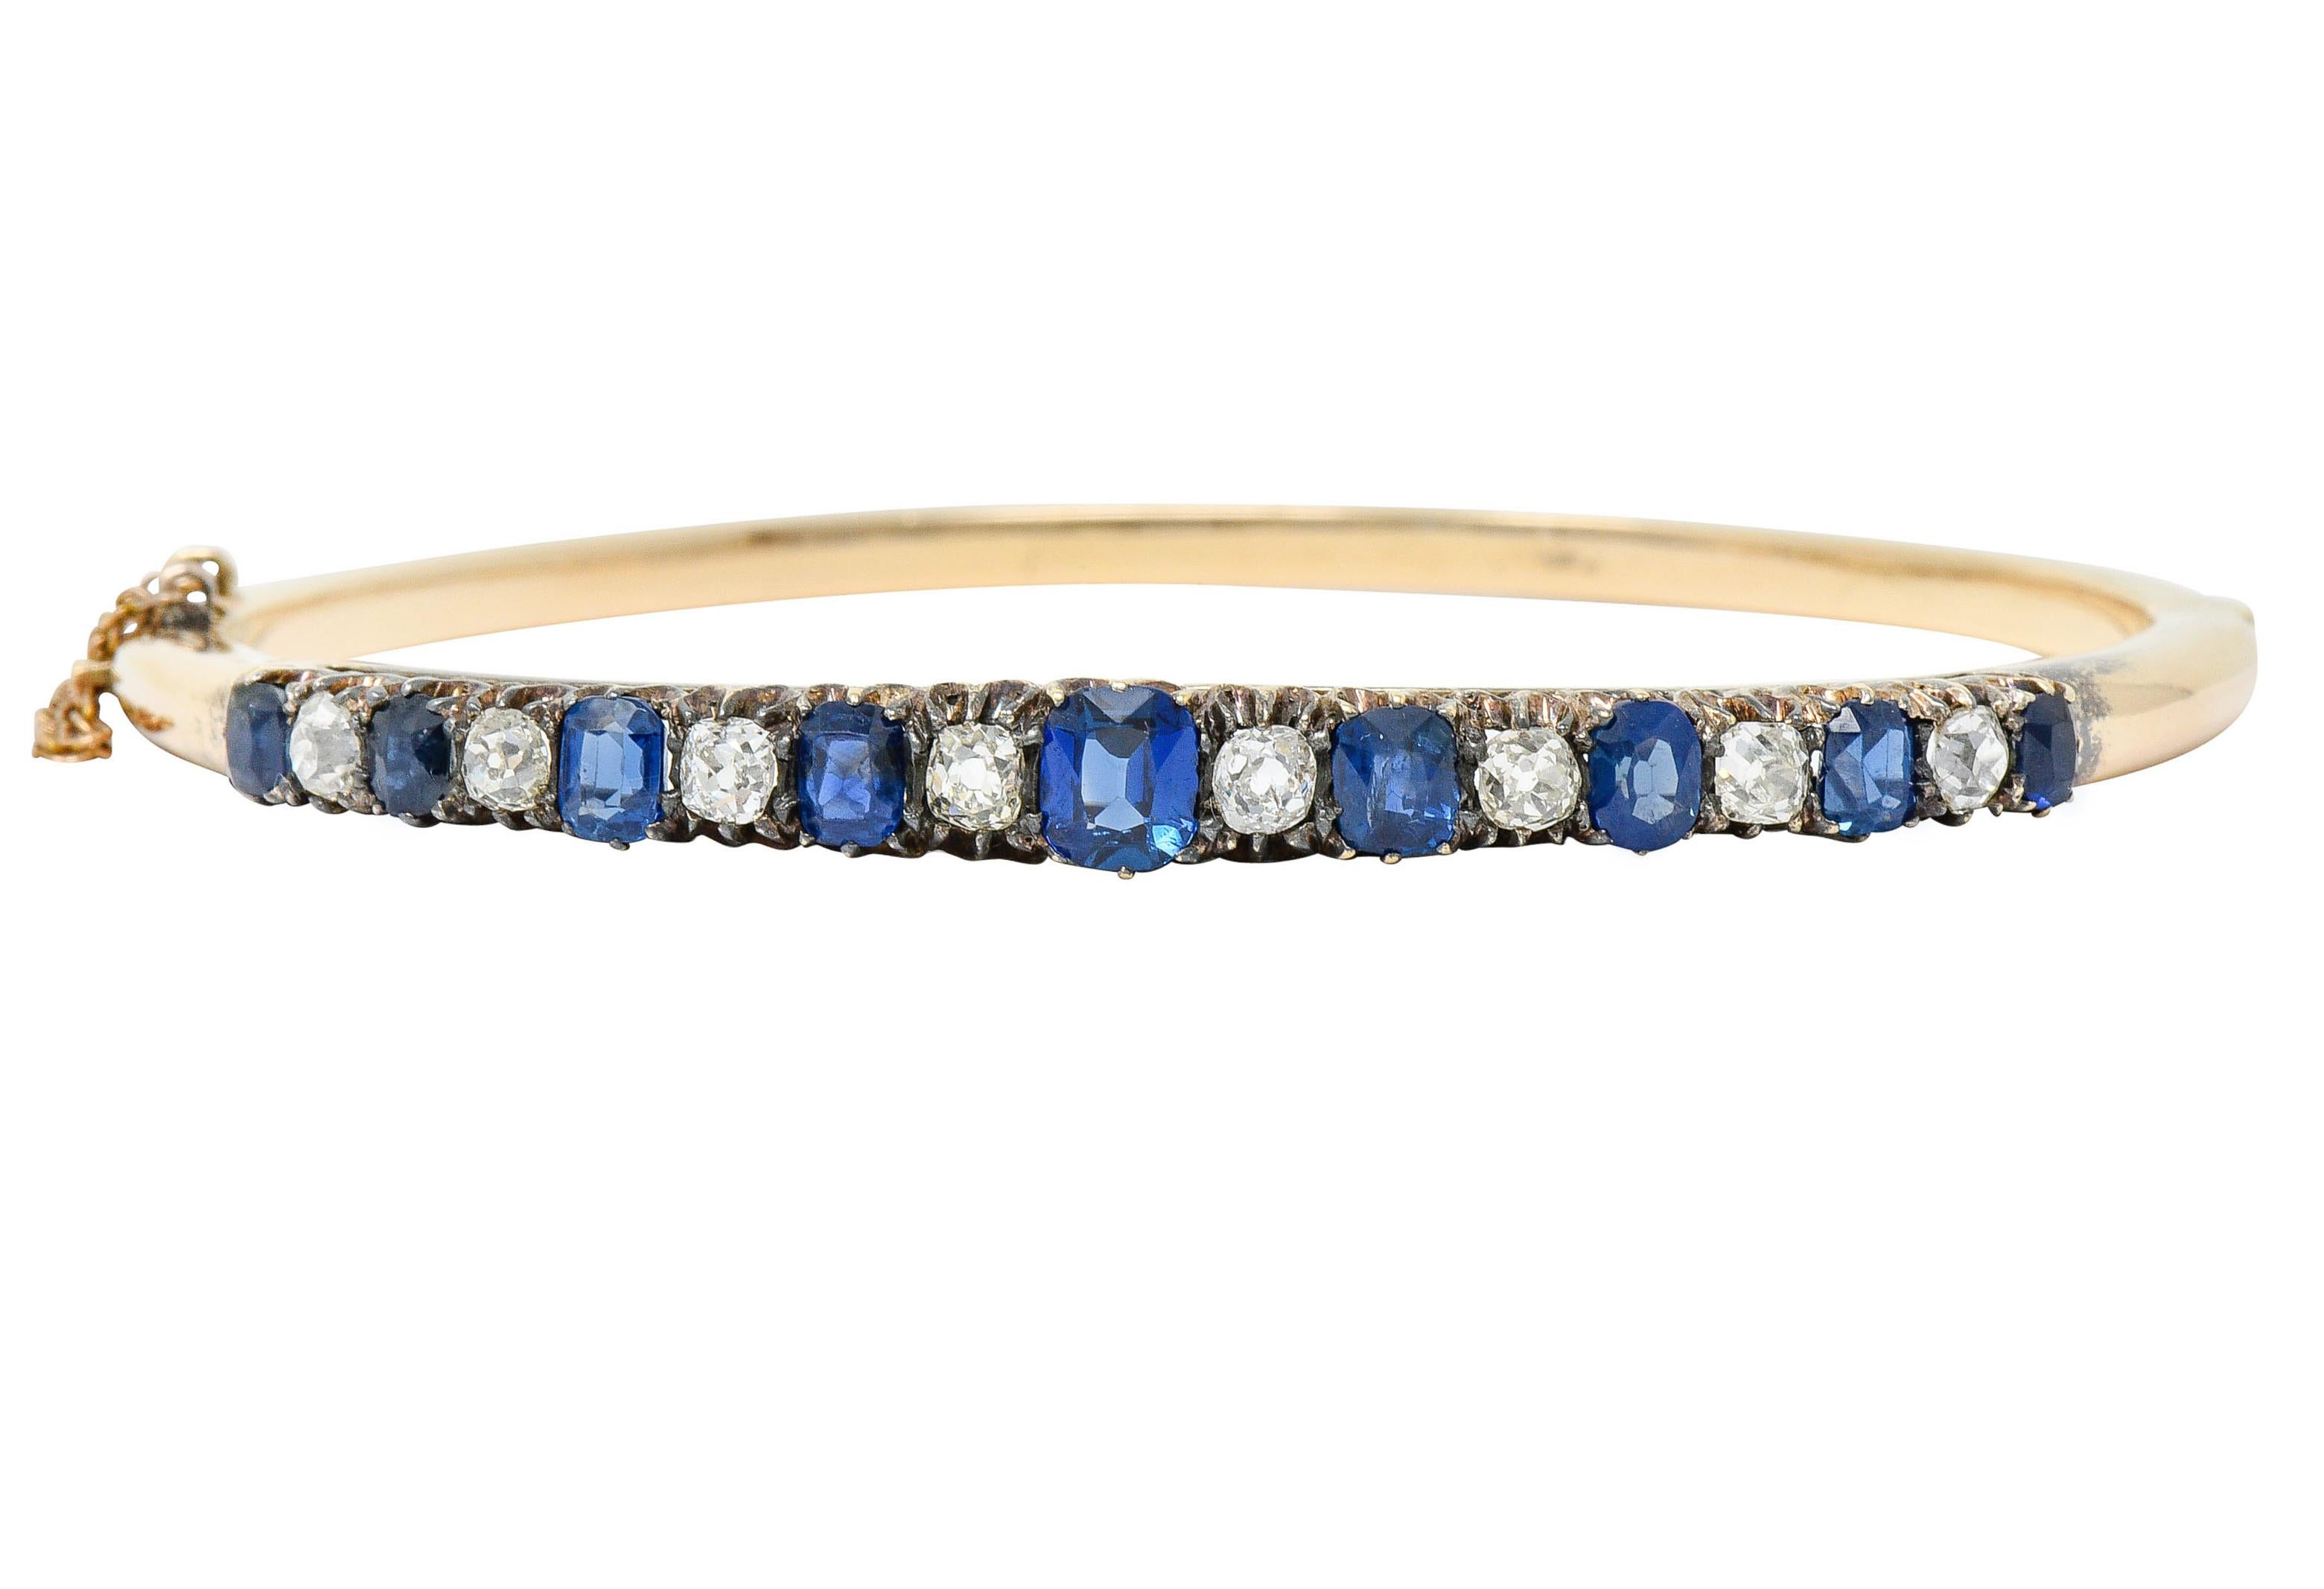 Hinged bangle bracelet claw set to front with diamonds and sapphires, alternating

Cushion cut sapphires are bright royal blue and well-matched while weighing approximately 2.10 carats

Old mine cut diamonds weigh in total approximately 1.04 carats